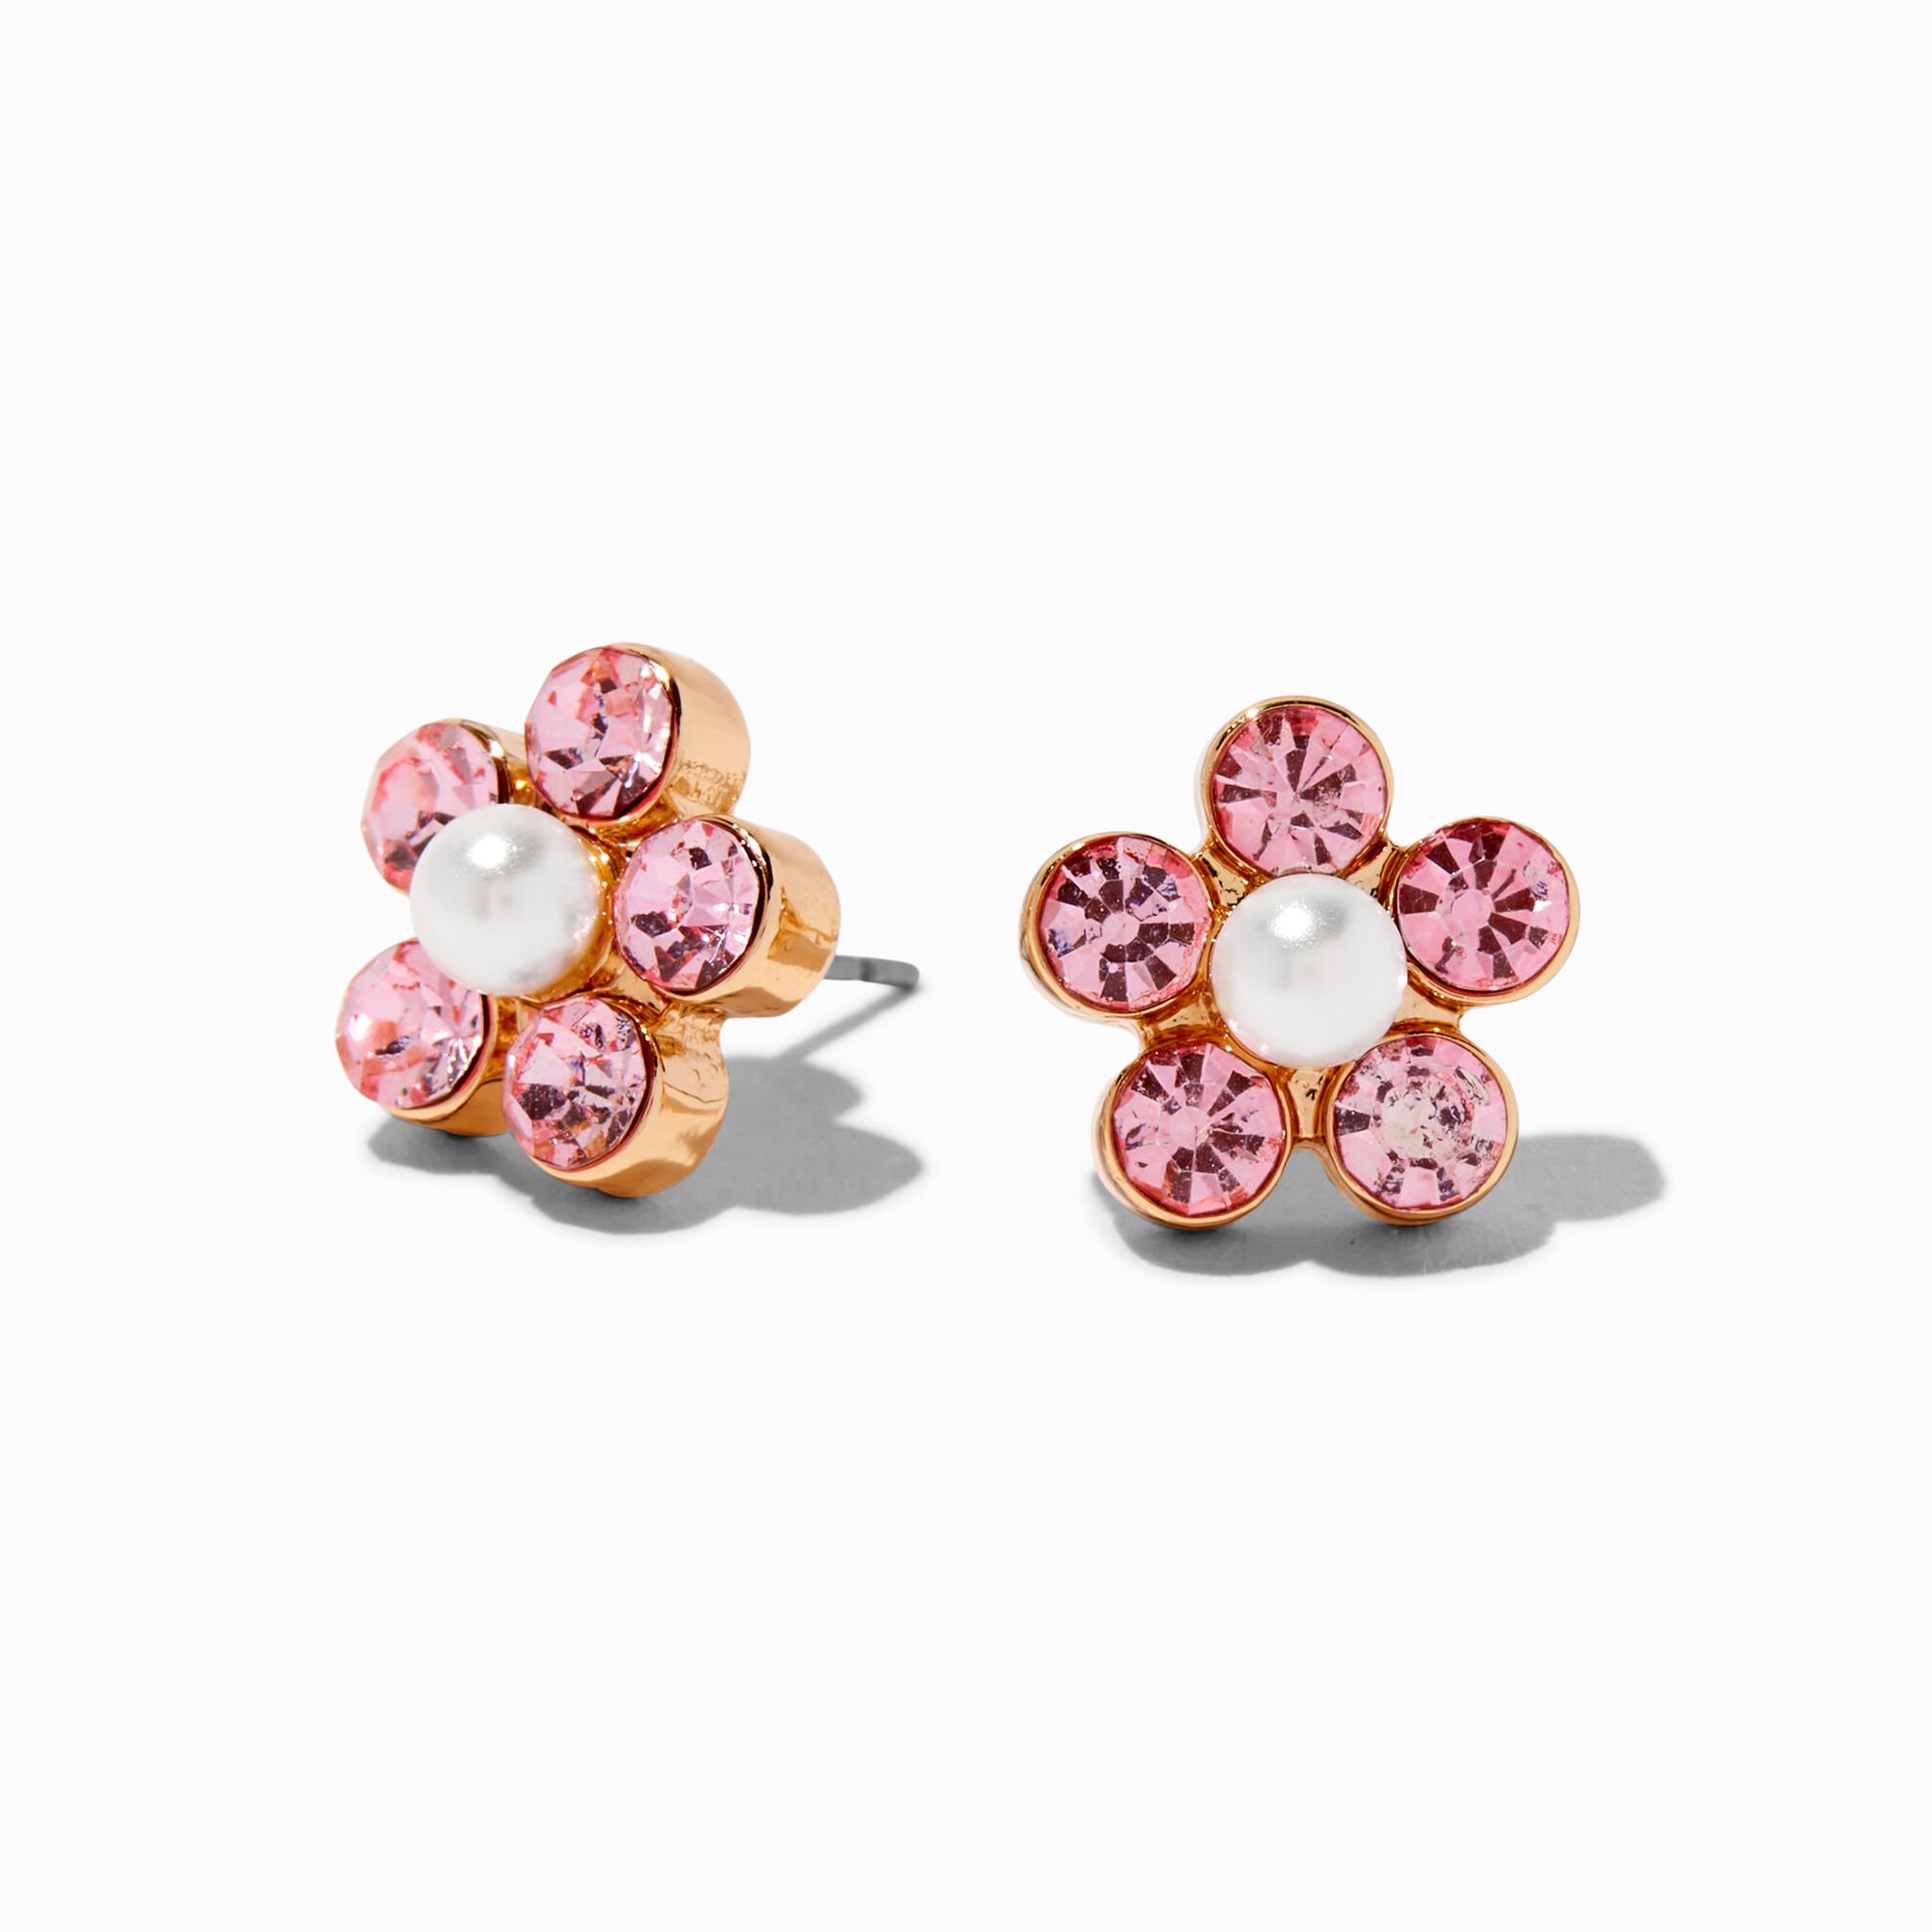 View Claires Crystal Flower Cluster Stud Earrings Pink information